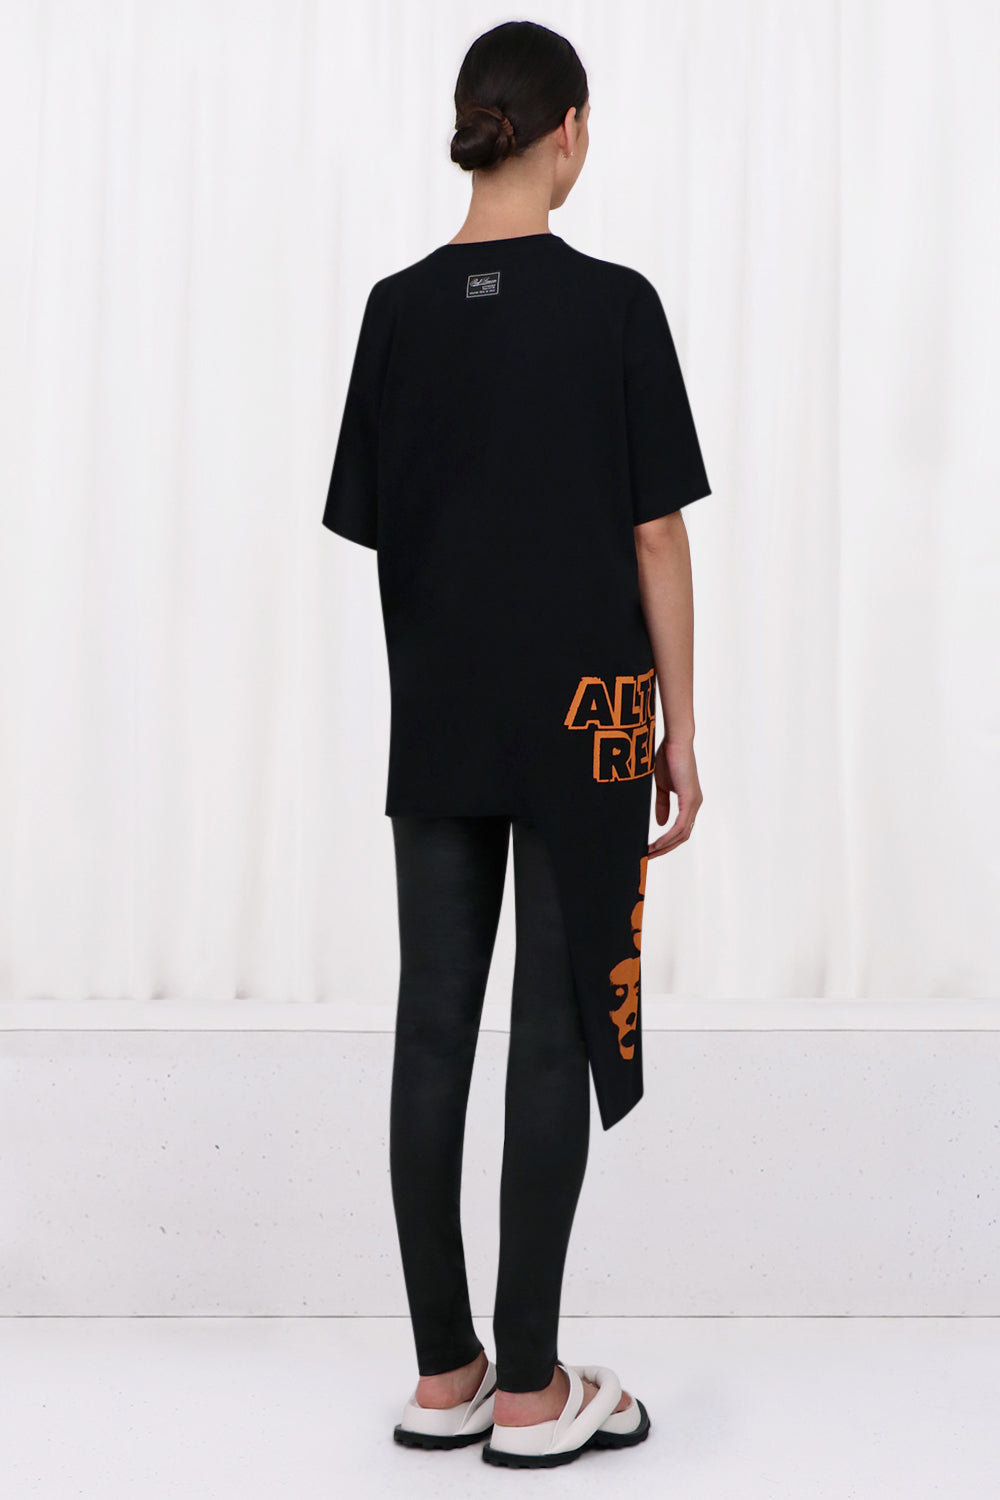 RAF SIMONS T-SHIRTS ALTERED REALITY CUT OUT T-SHIRT | BLACK